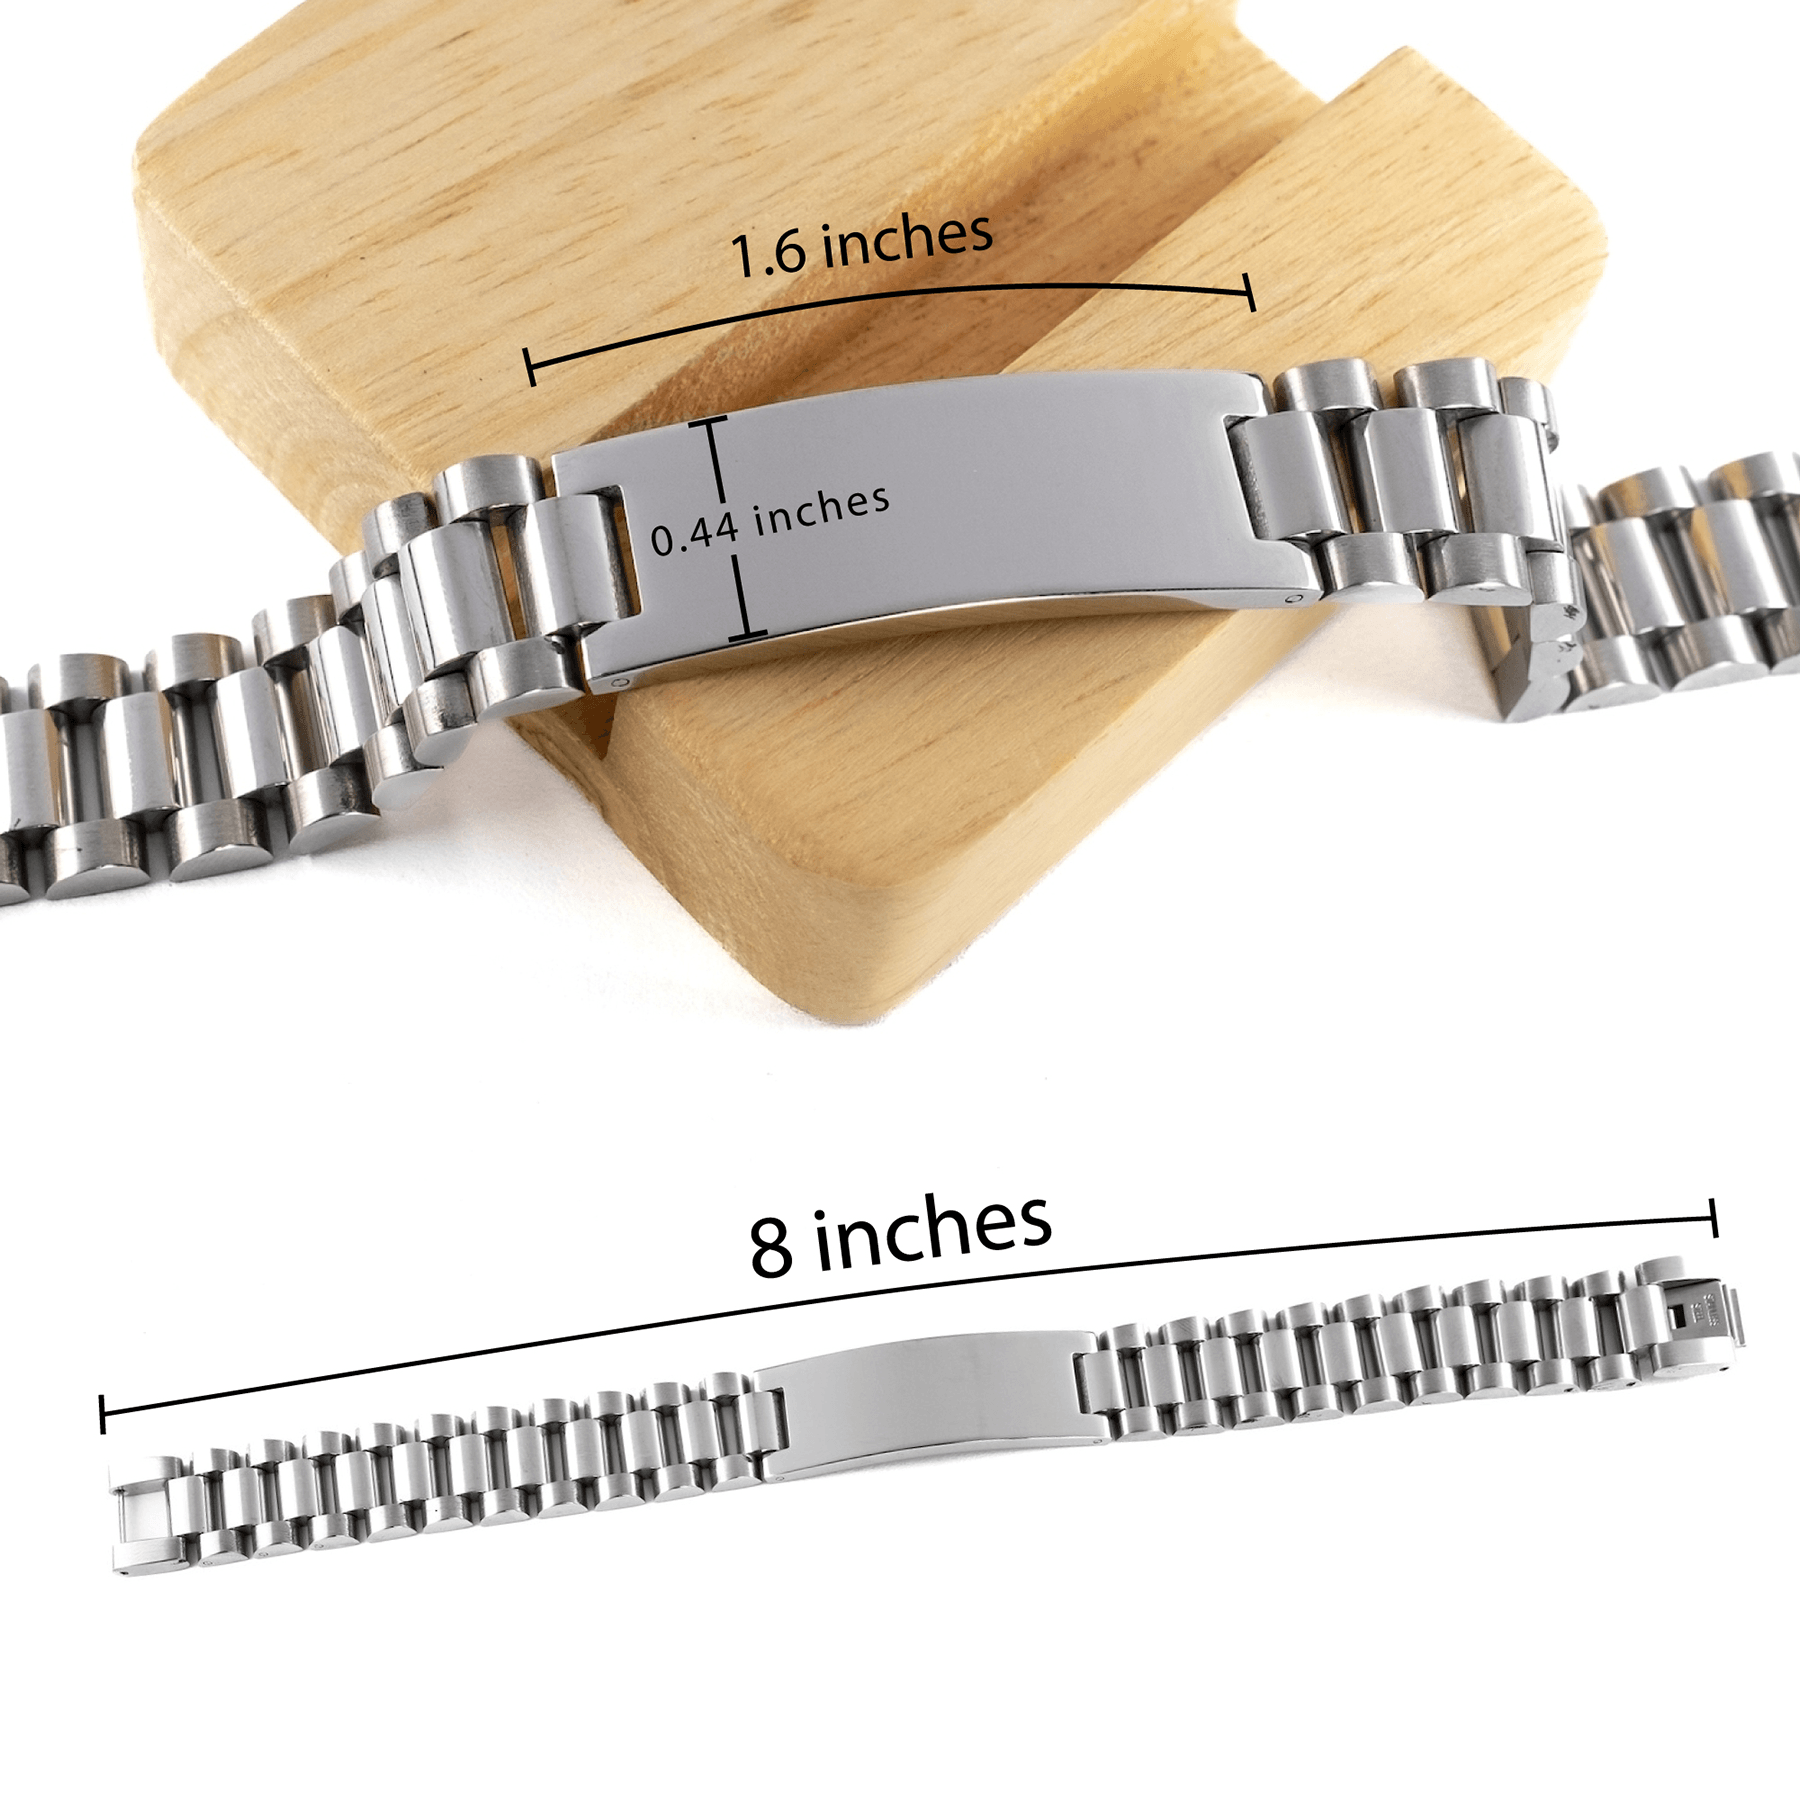 Remarkable Occupational Therapist Gifts, Your dedication and hard work, Inspirational Birthday Christmas Unique Ladder Stainless Steel Bracelet For Occupational Therapist, Coworkers, Men, Women, Friends - Mallard Moon Gift Shop